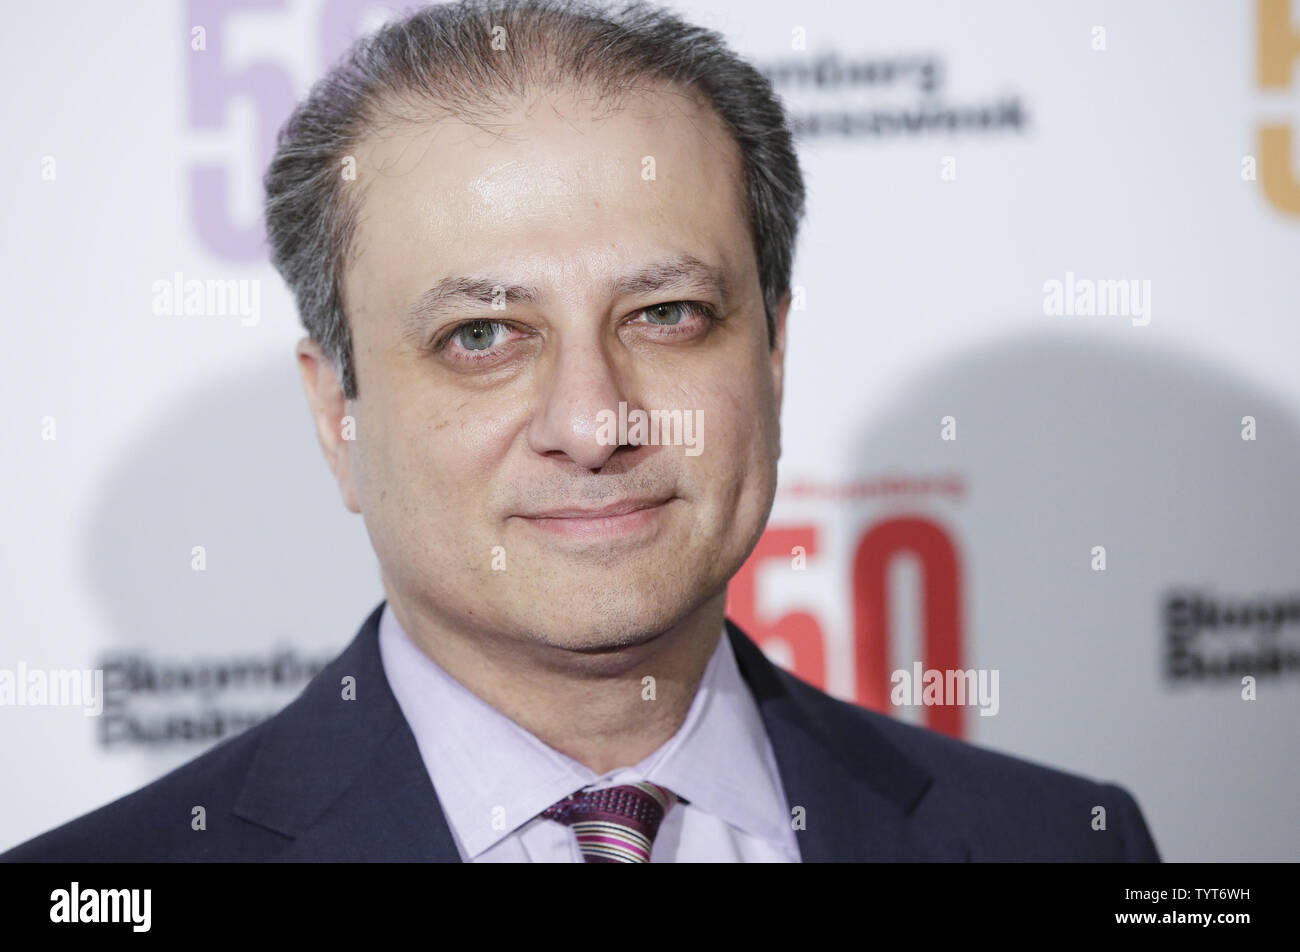 Preet Bharara arrives on the red carpet at 'The Bloomberg 50' Celebration at Gotham Hall on December 4, 2017 in New York City.      Photo by John Angelillo/UPI Stock Photo